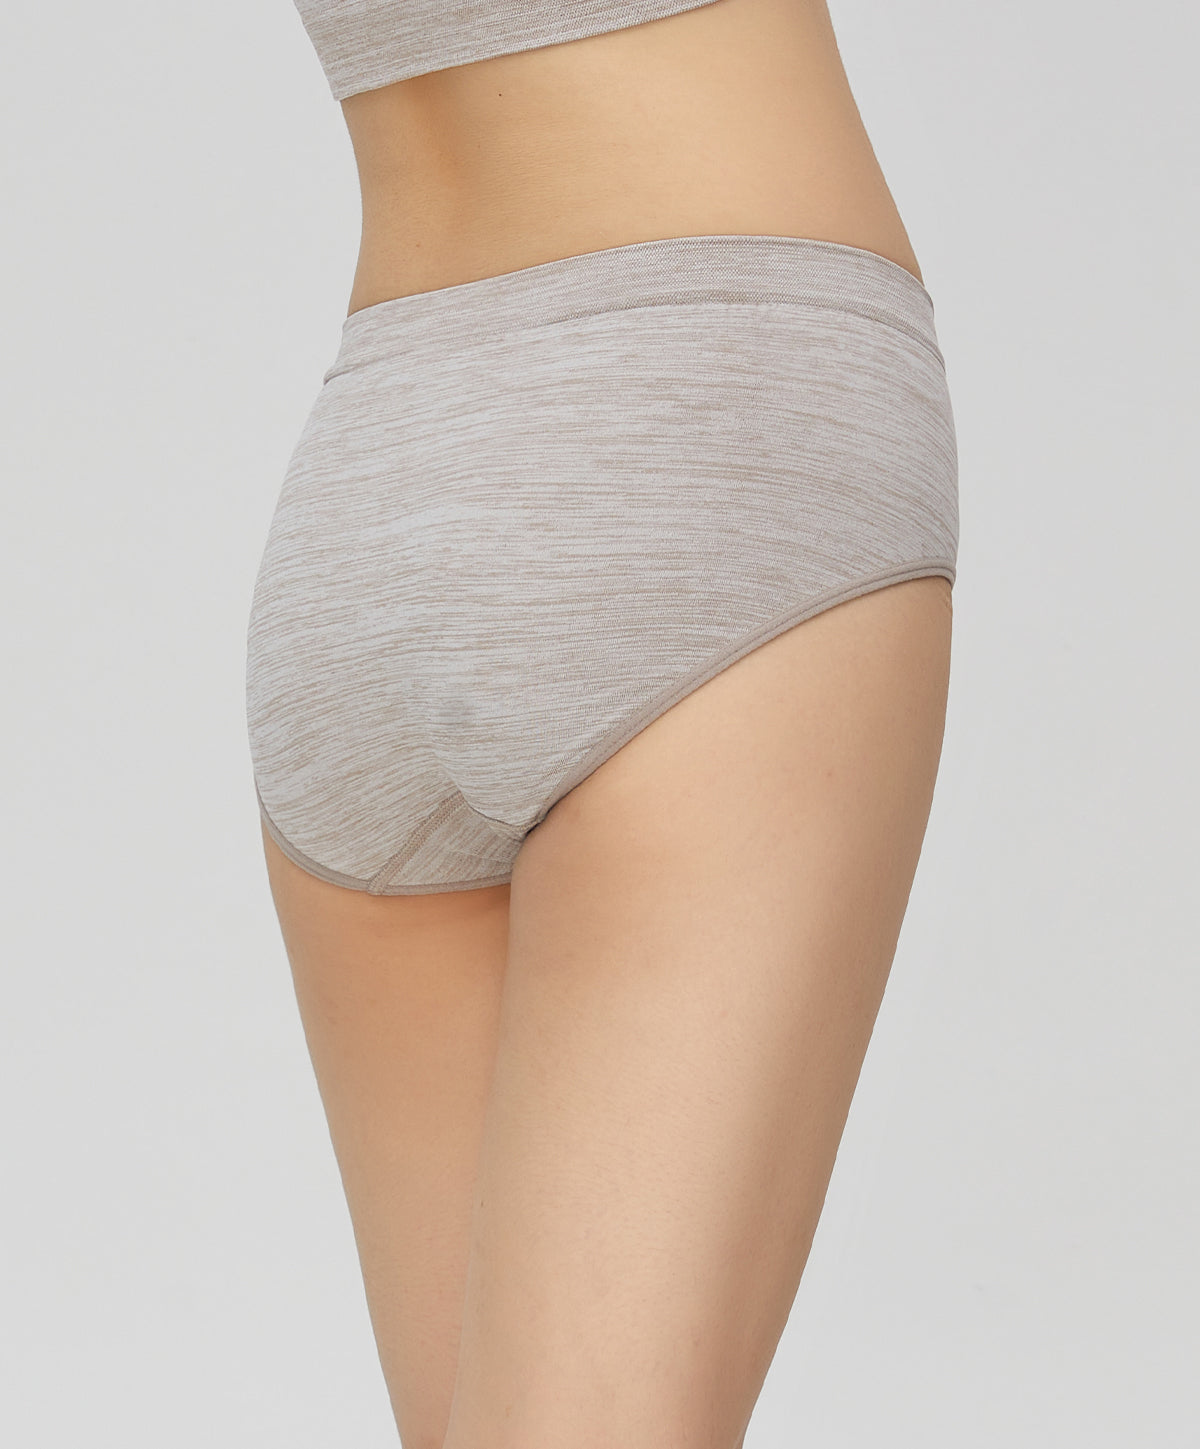 Ying Young - Everyday Essentials Classic Slip Panties Grey XS